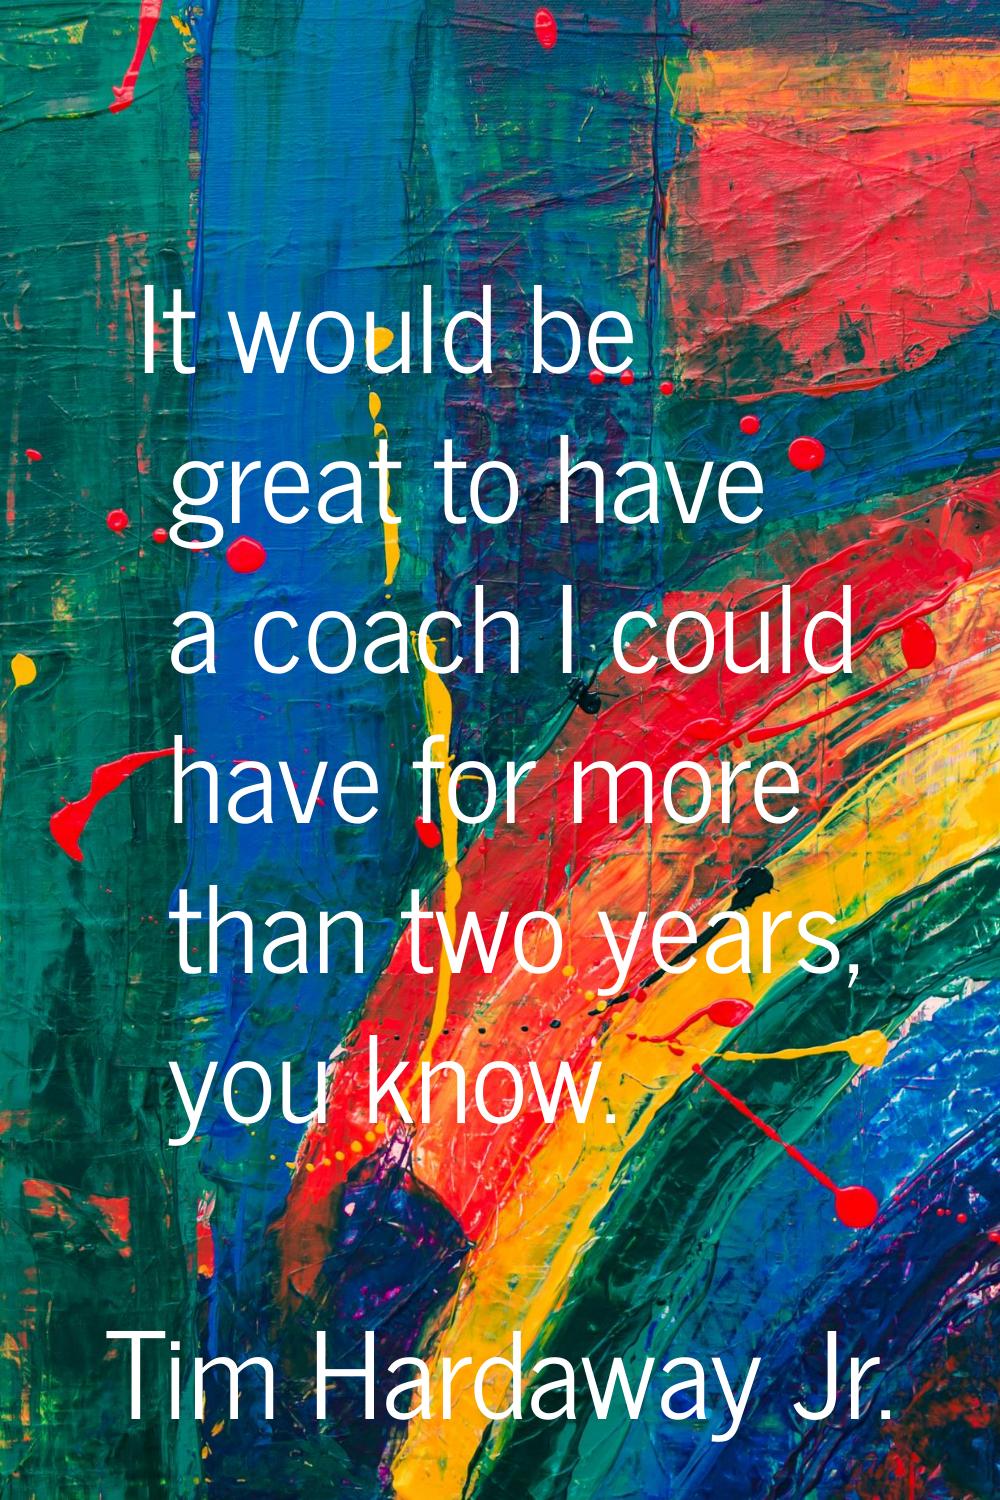 It would be great to have a coach I could have for more than two years, you know.